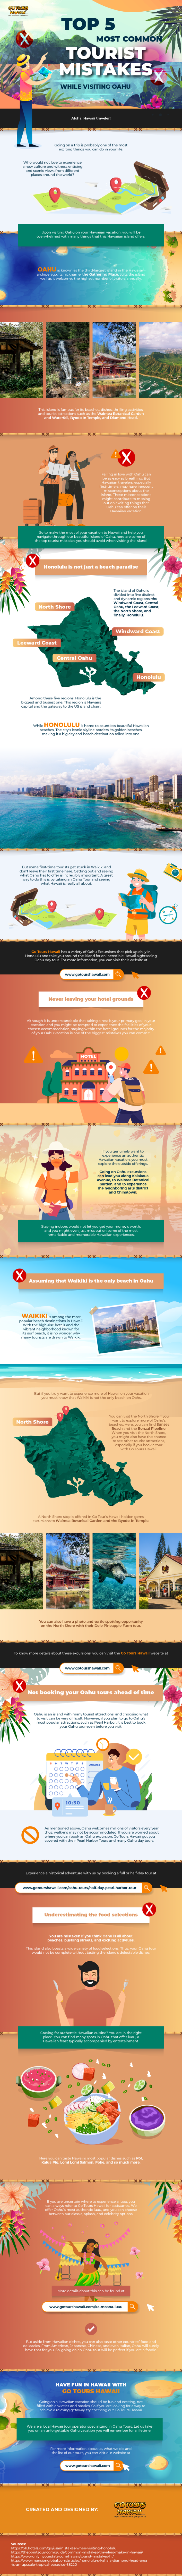 Top-5-Tourist-Mistakes-You-Avoid When-Visiting-Oahu-infographic-image-GTH